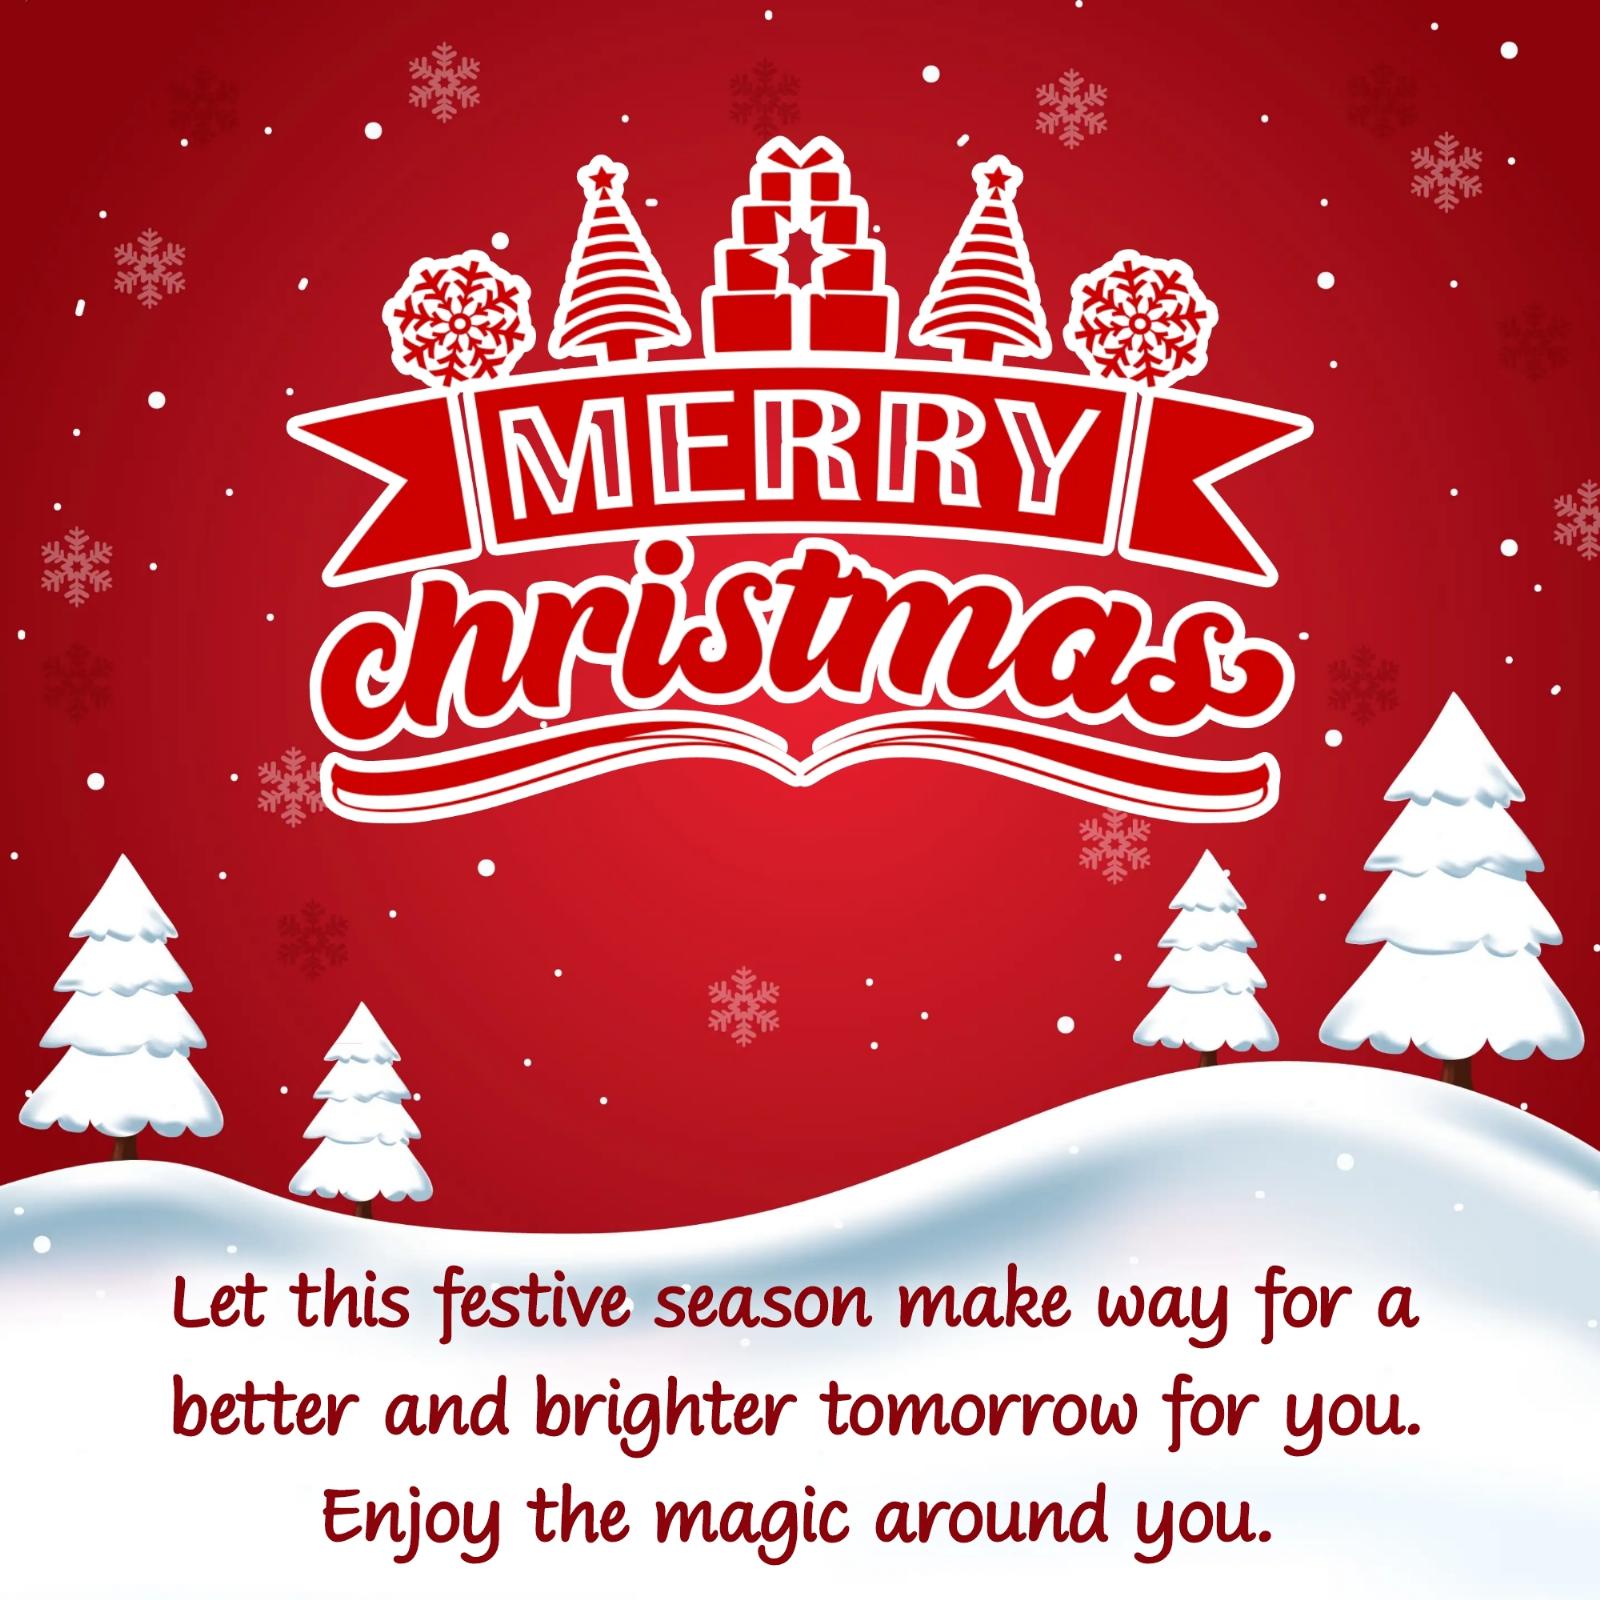 Let this festive season make way for a better and brighter